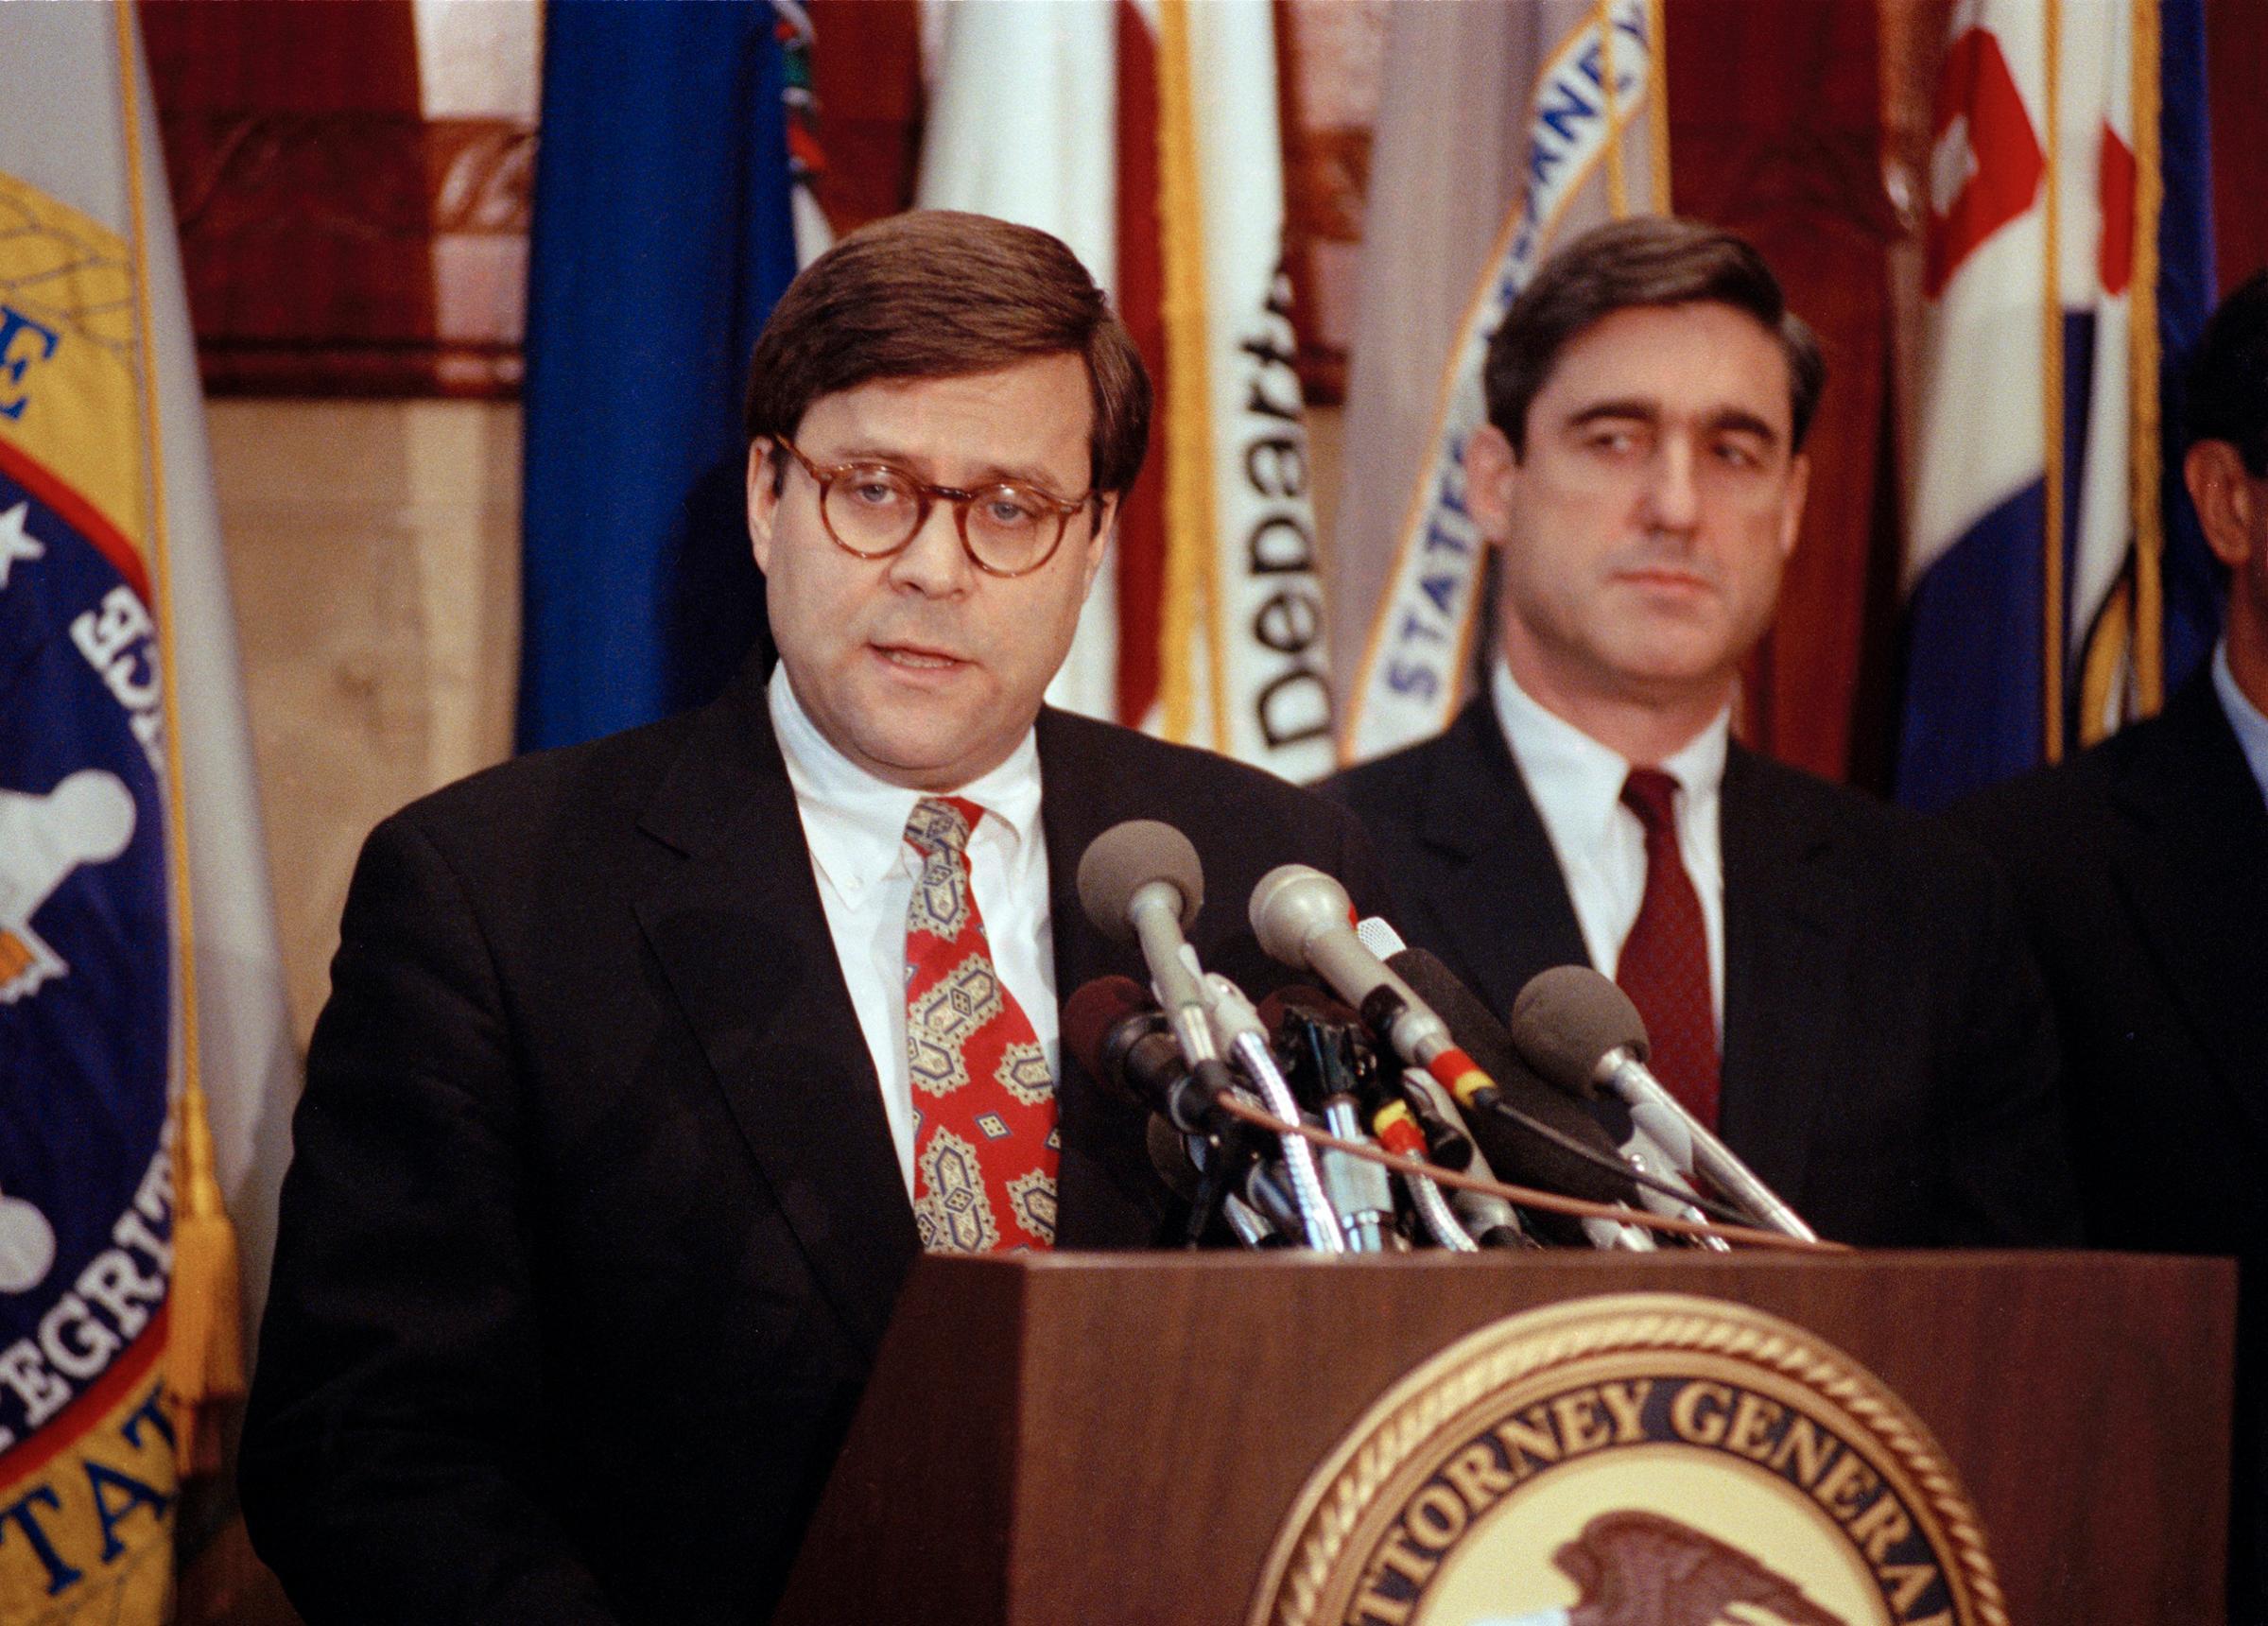 Barr was Mueller’s boss during his first stint at DOJ, and the two are close friends